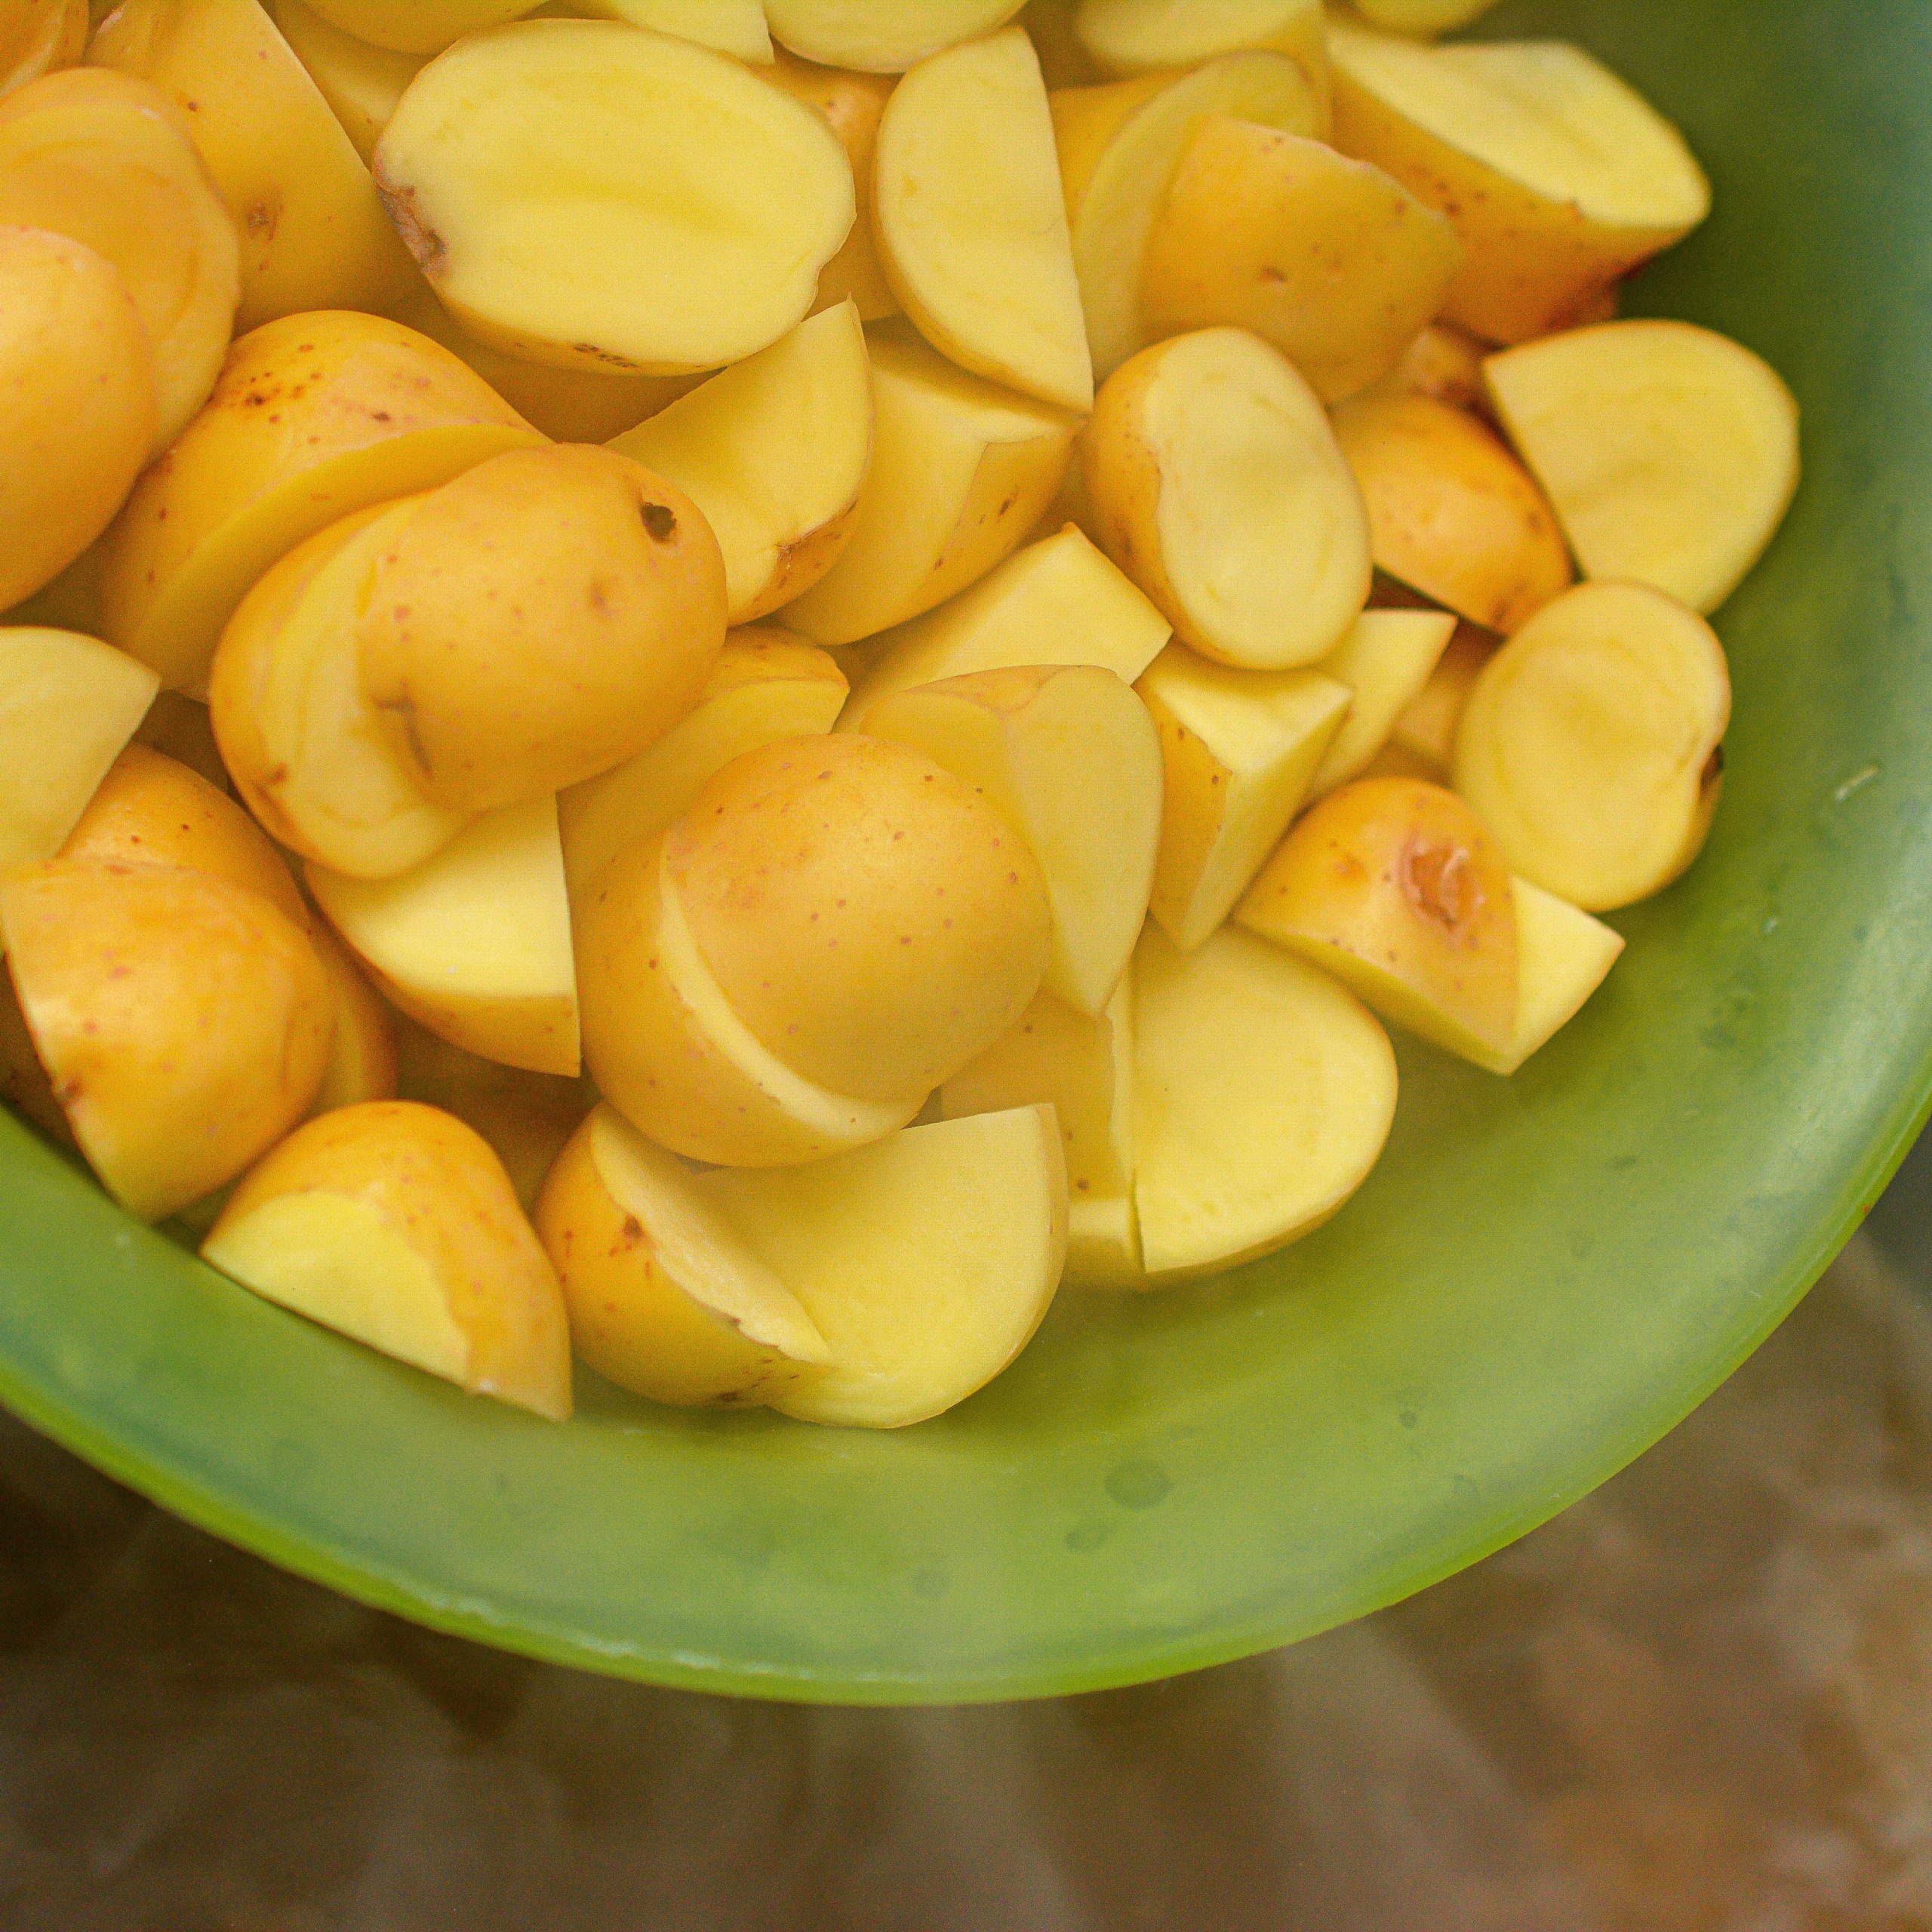 Place the potatoes into the pot, and simmer on medium low heat for 10-12 minutes until the potatoes are softened. 